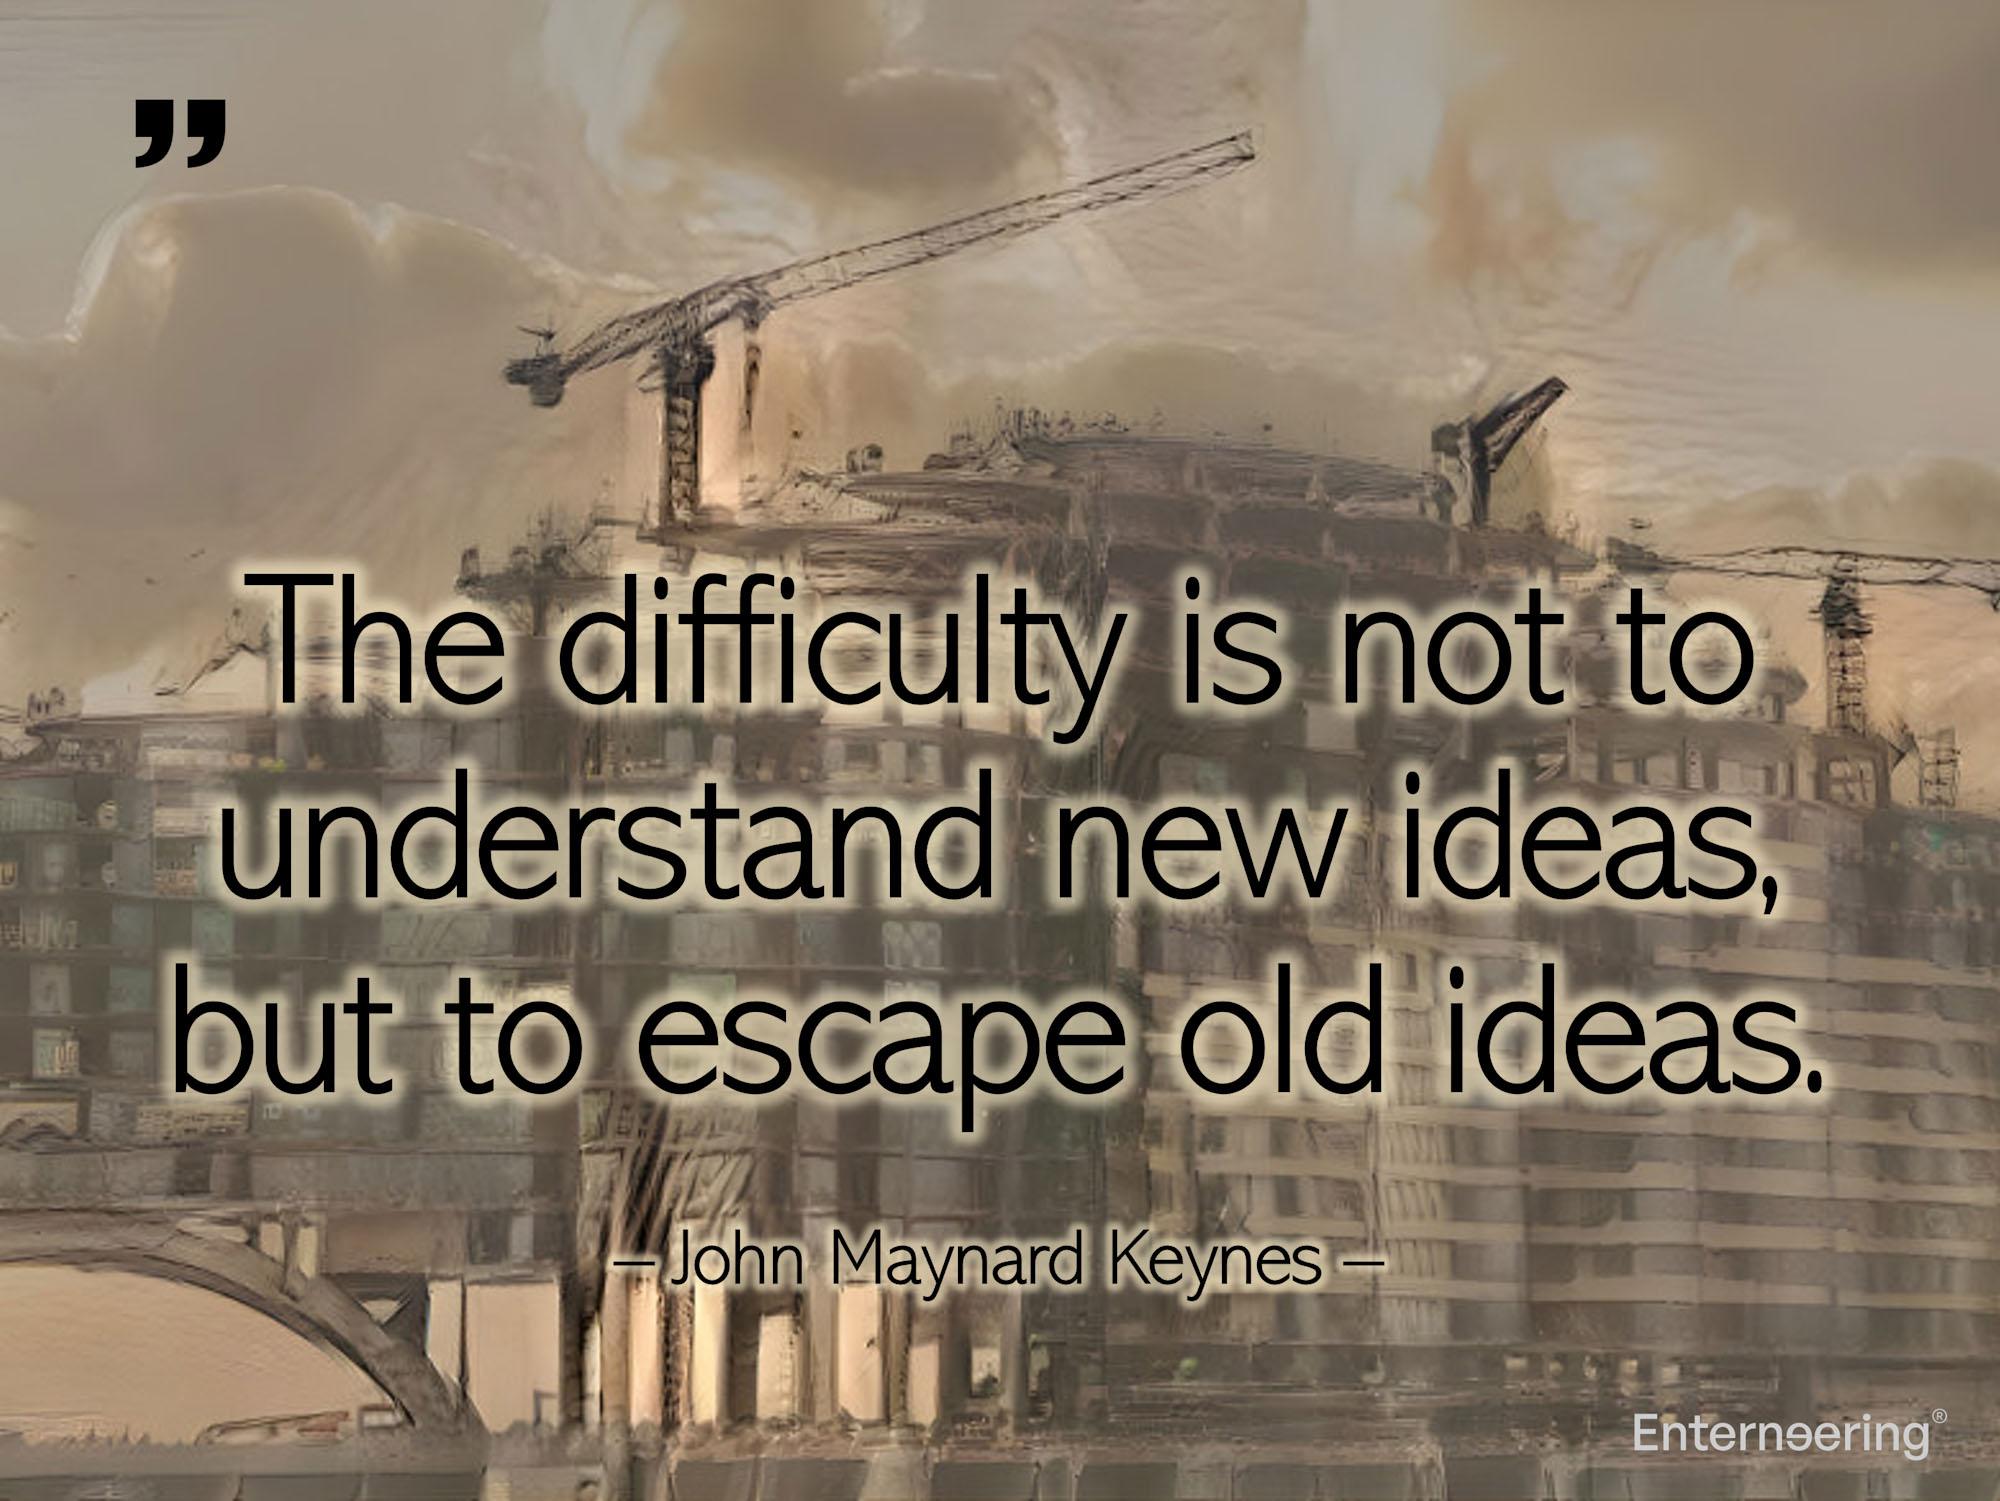 The difficulty to escape old ideas